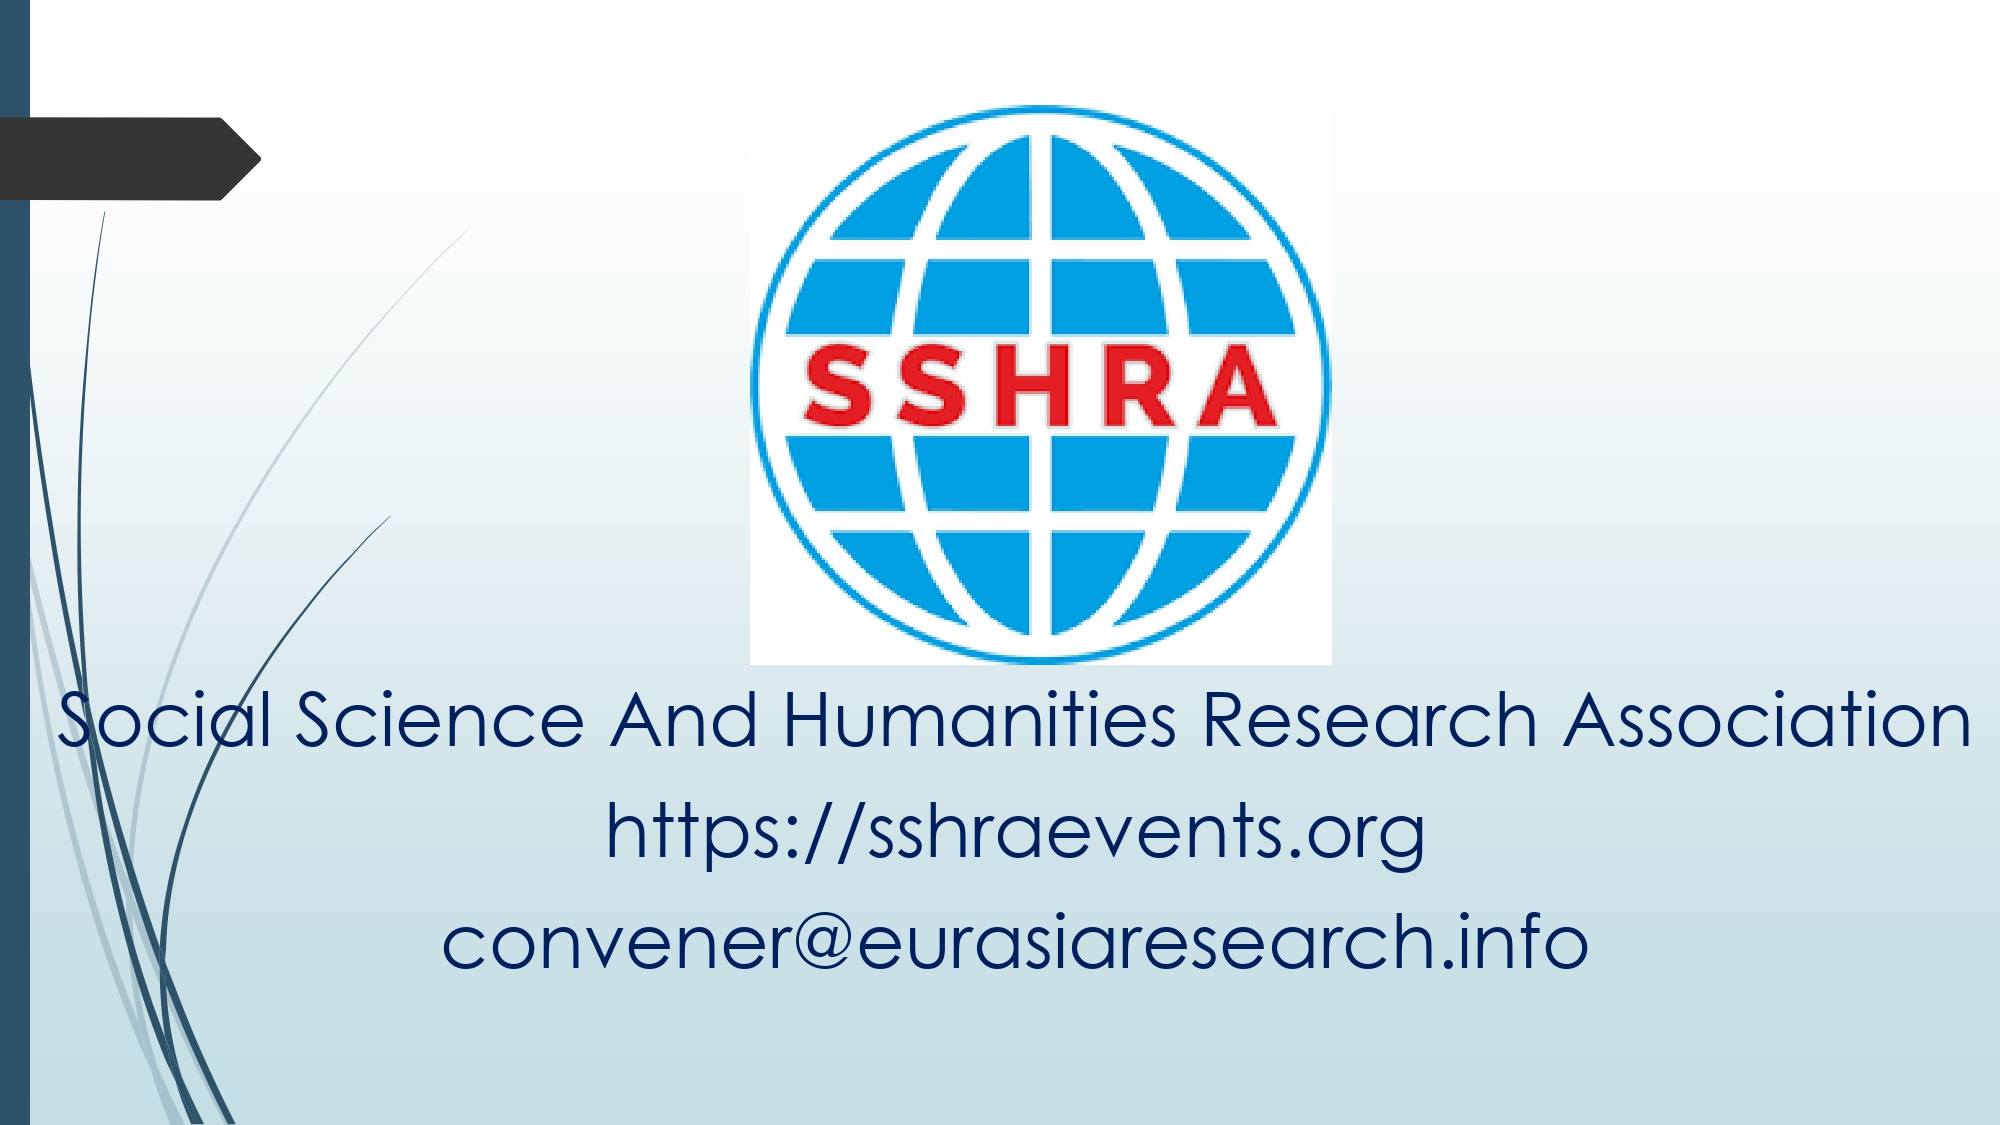 SSHRA 2023 – Social Science & Humanities Research Association International Conference, 22-23 November, Singapore